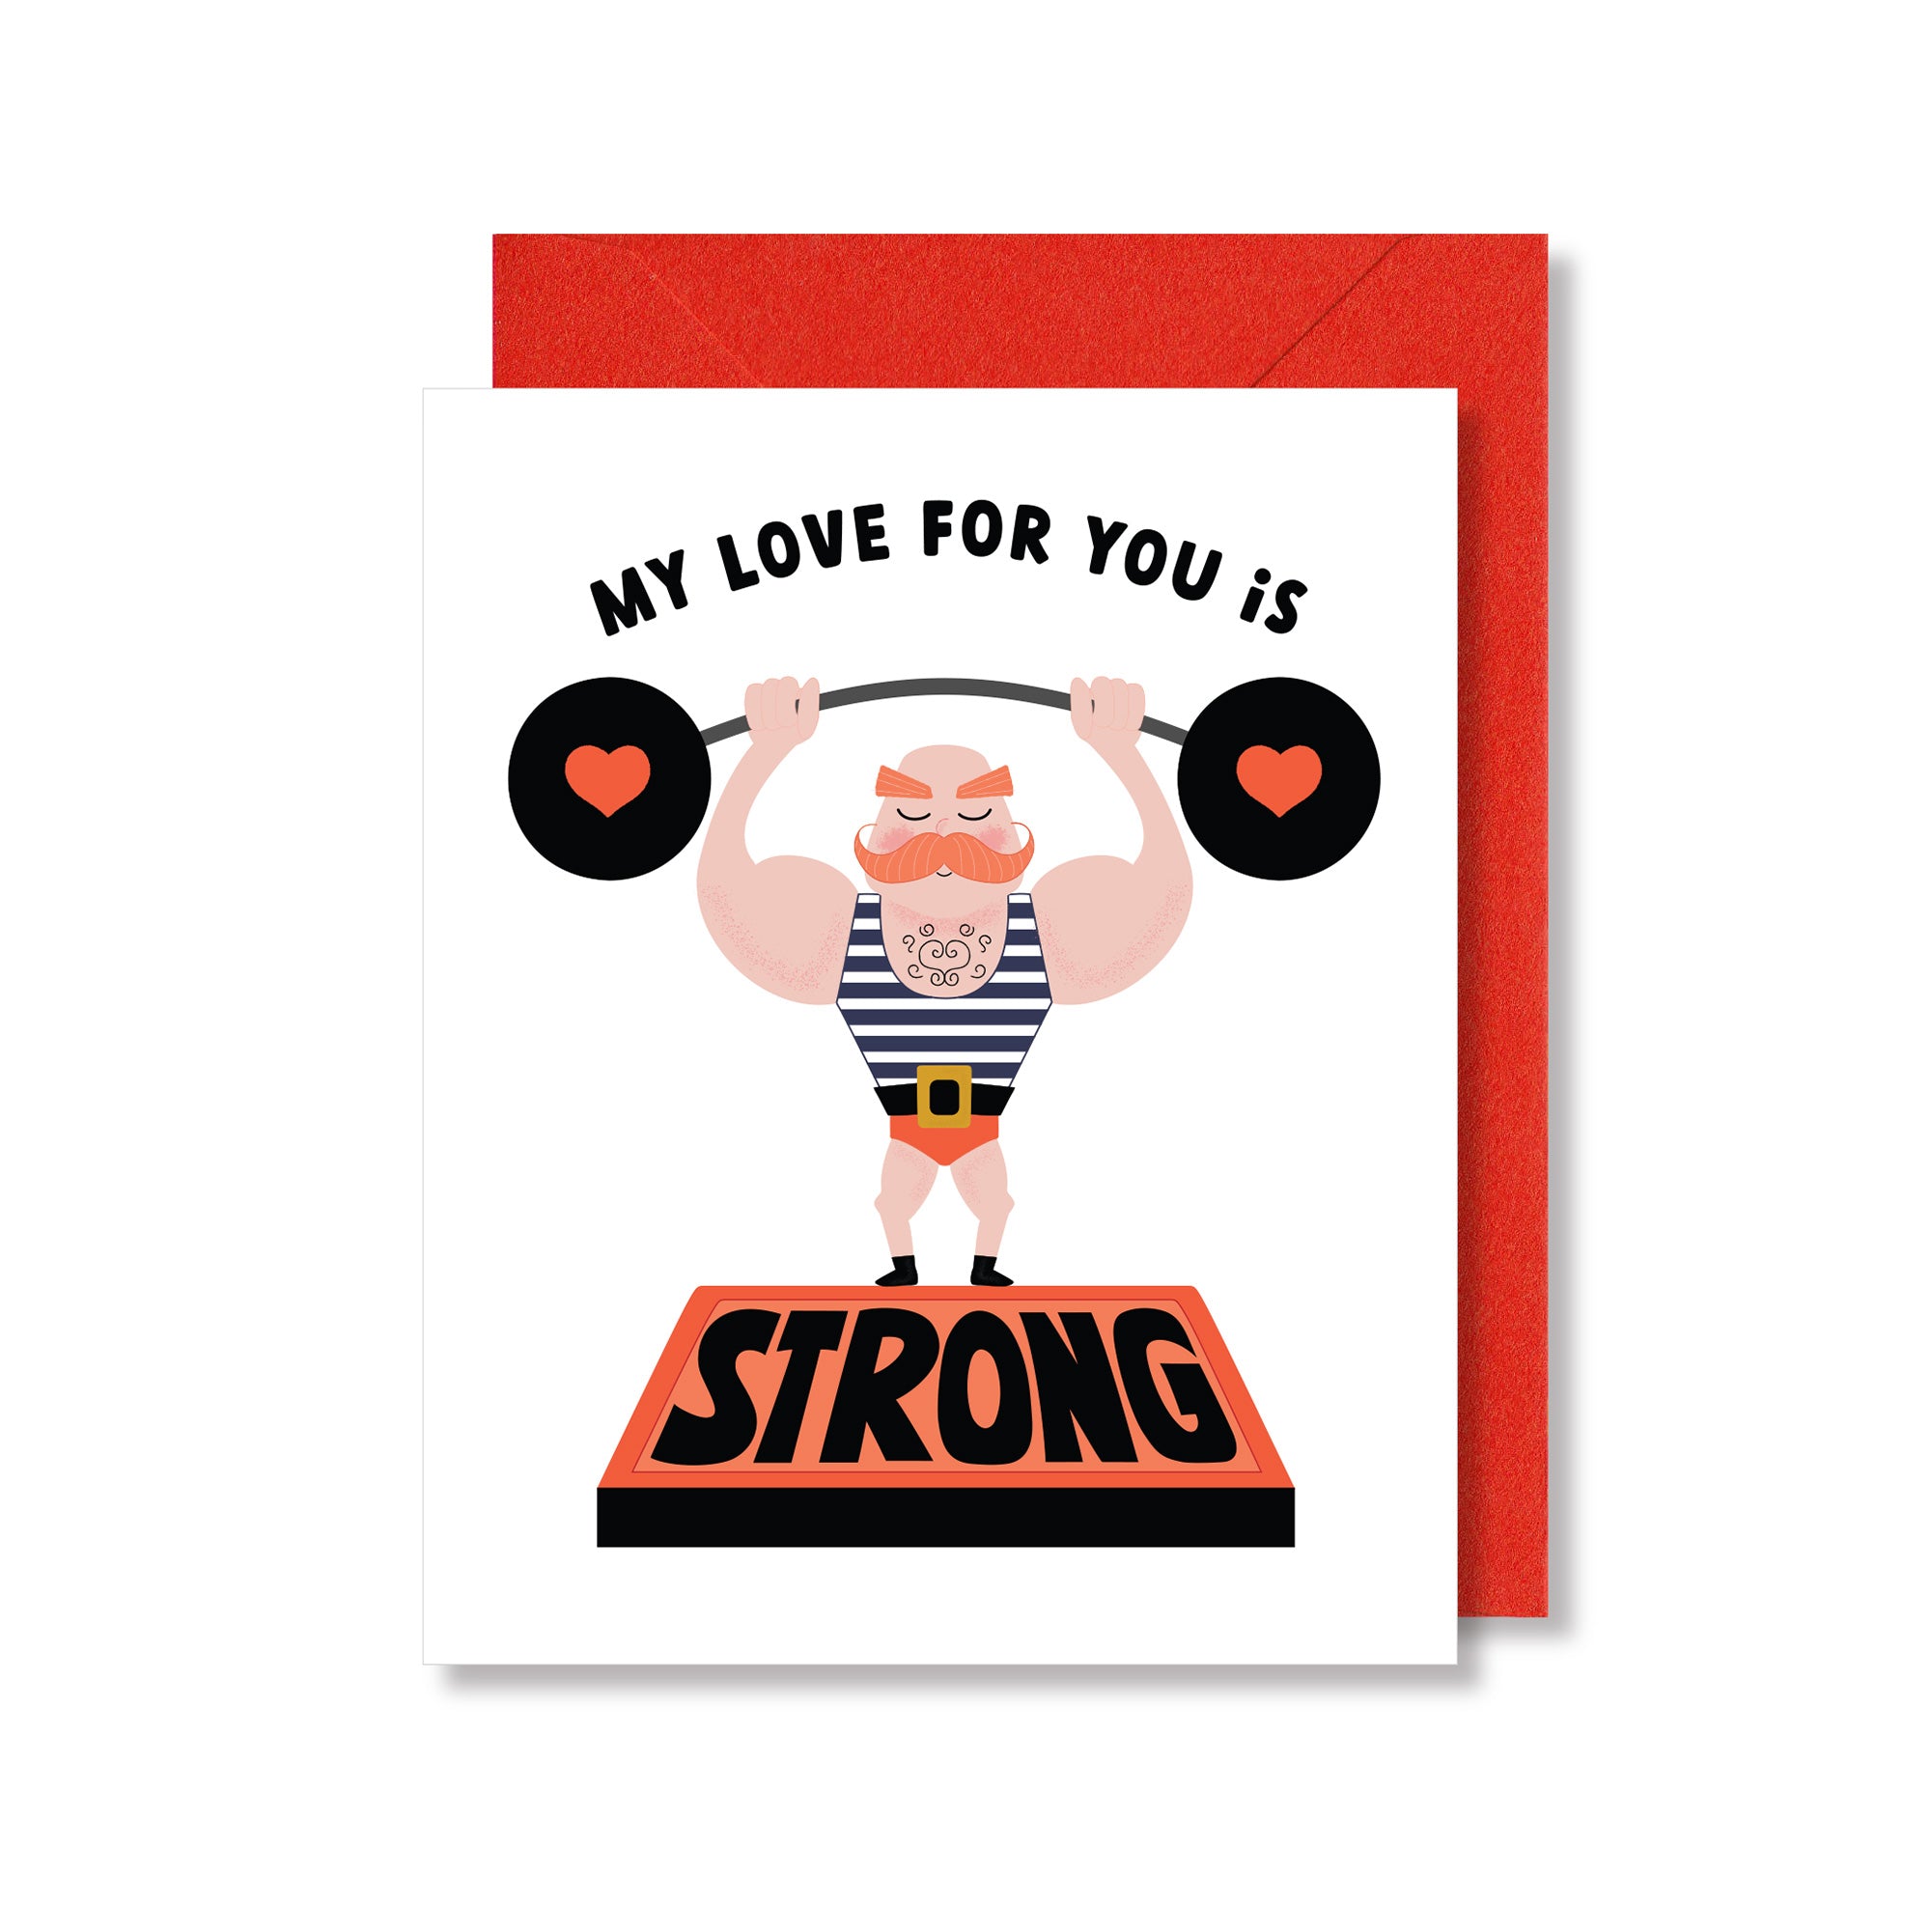 Love card with strongman illustration by Gigglemugg